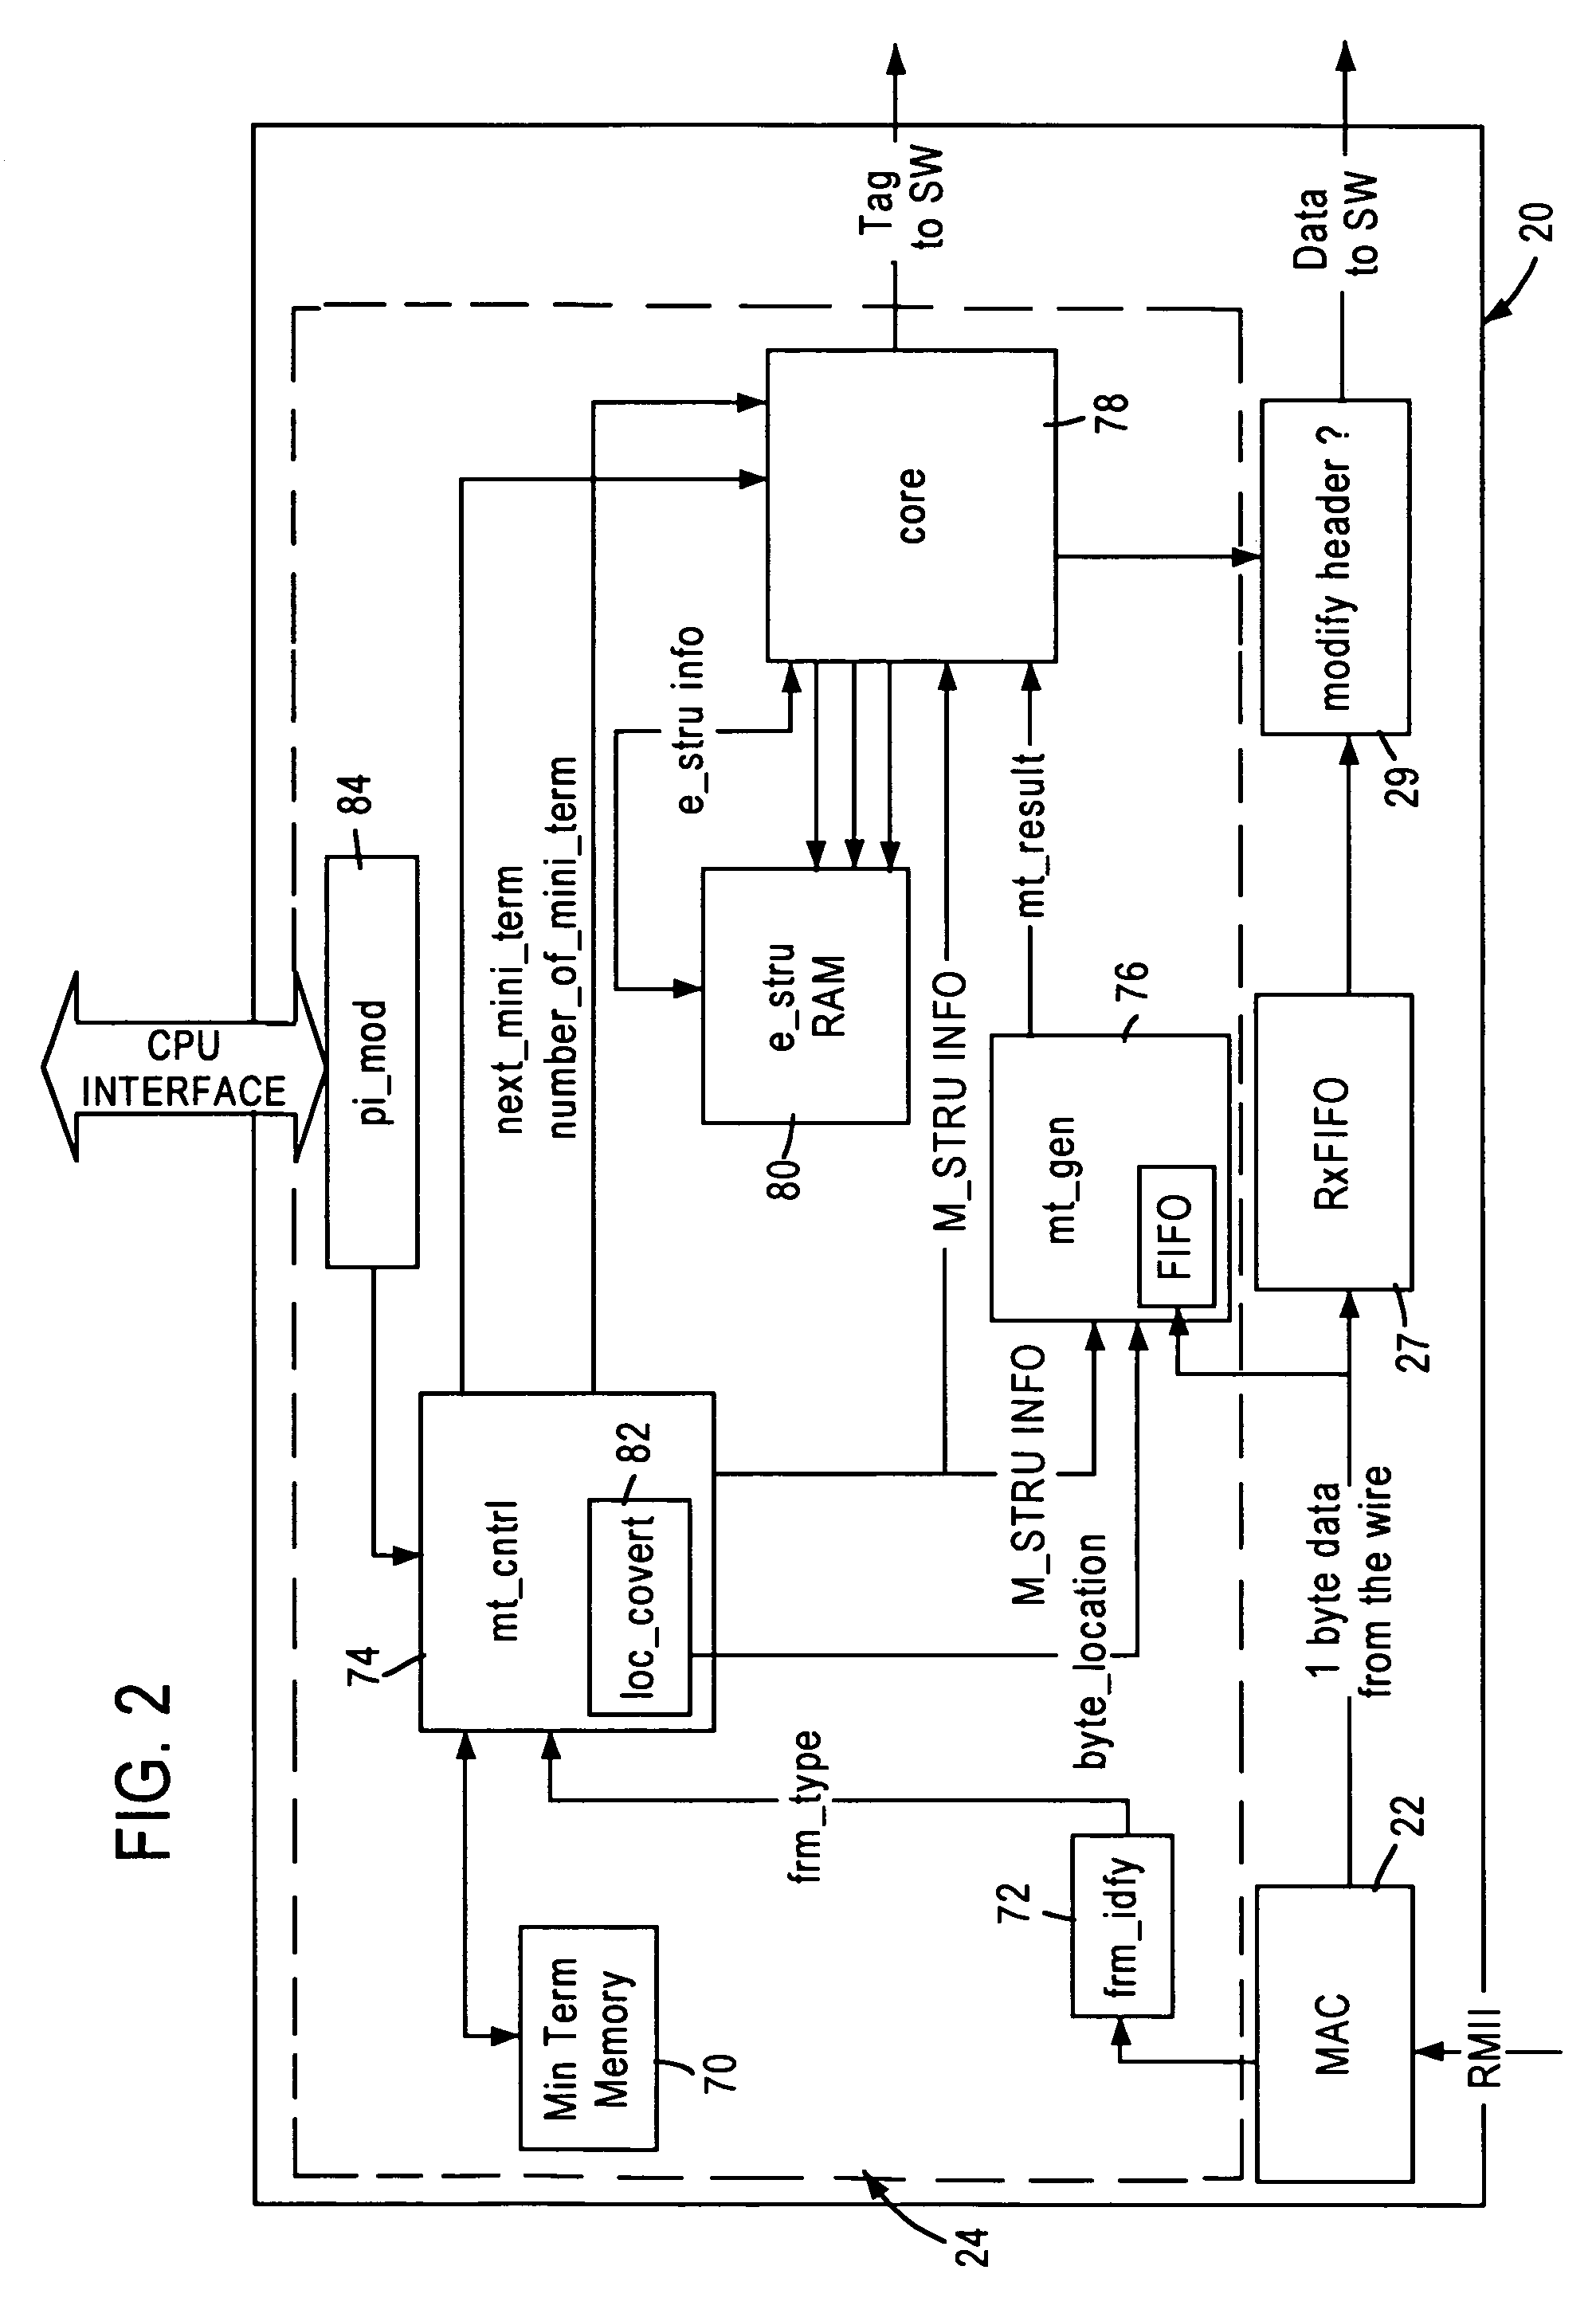 Selective address table aging in a network switch based on application state determined from a received data packet